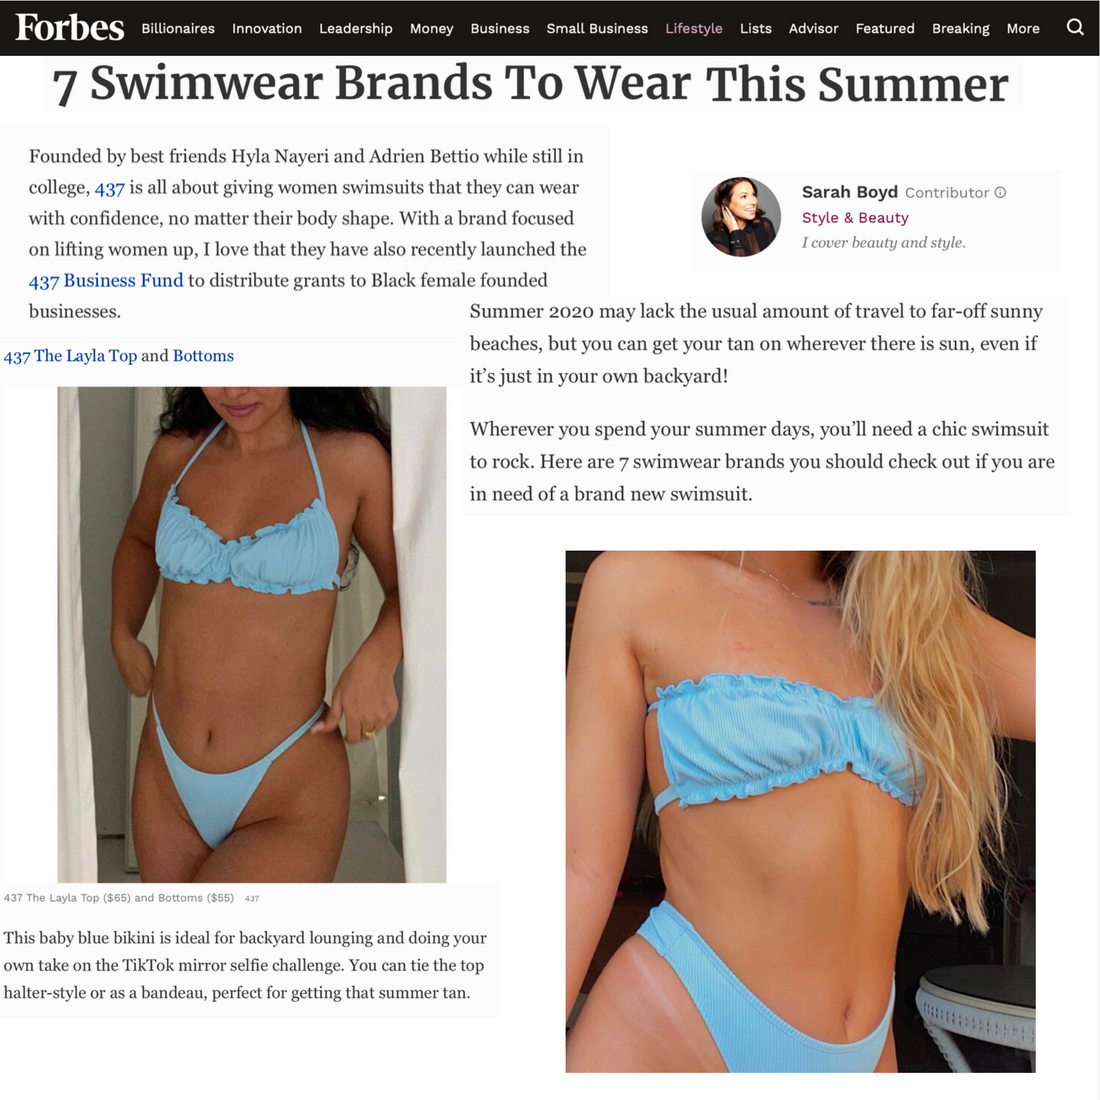 Your brand destination for swimwear and clothing